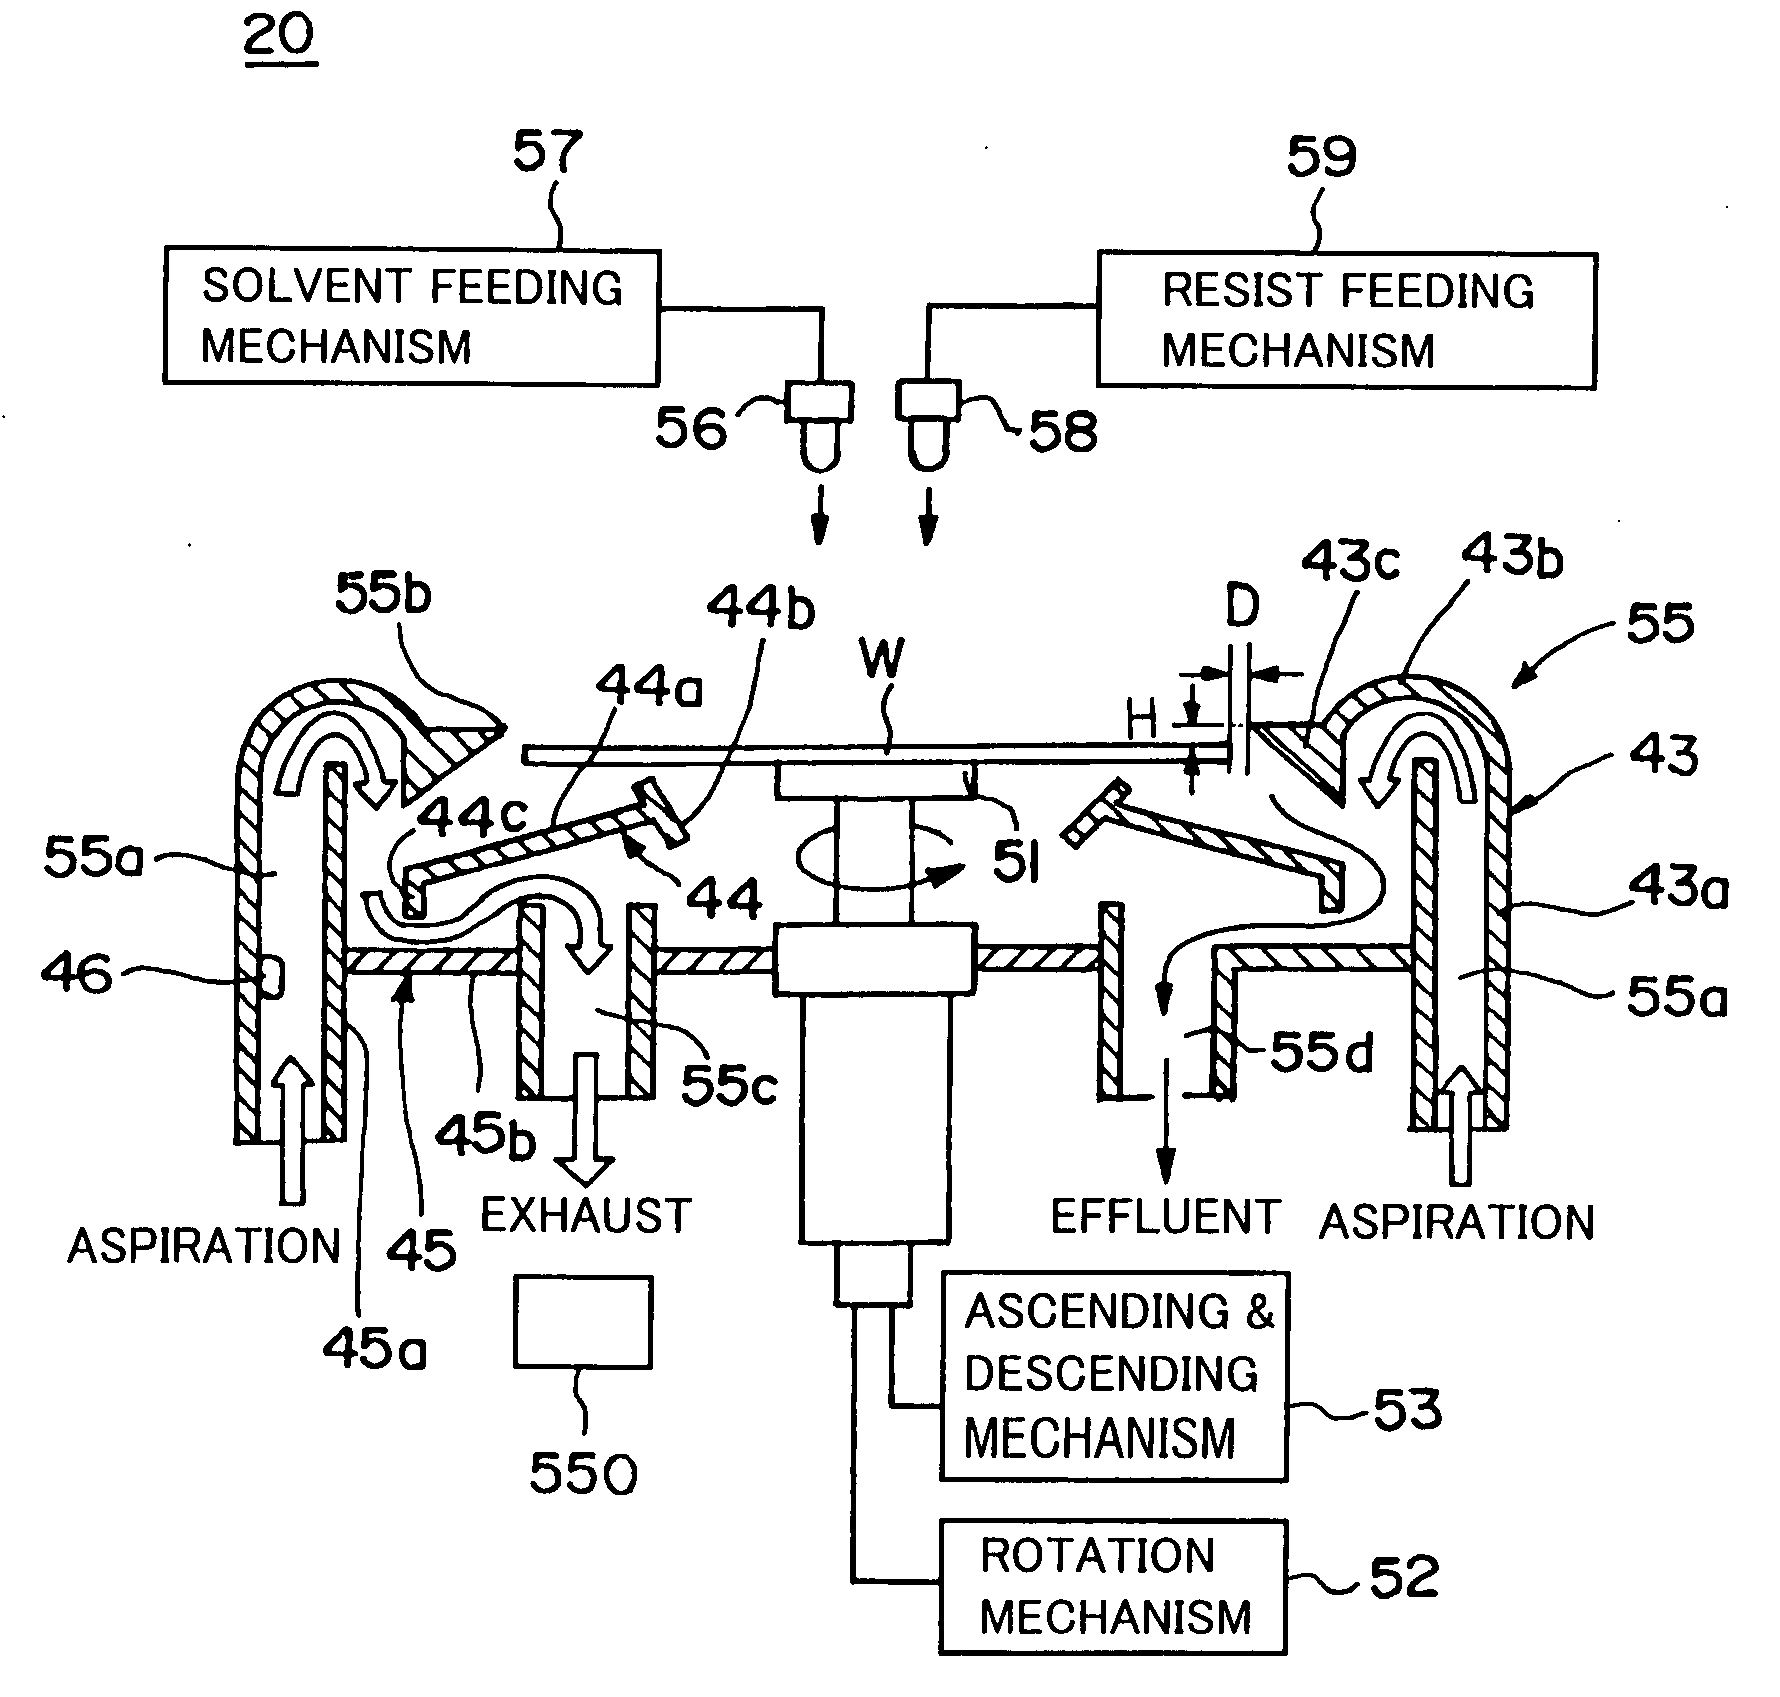 Apparatus and method of forming an applied film